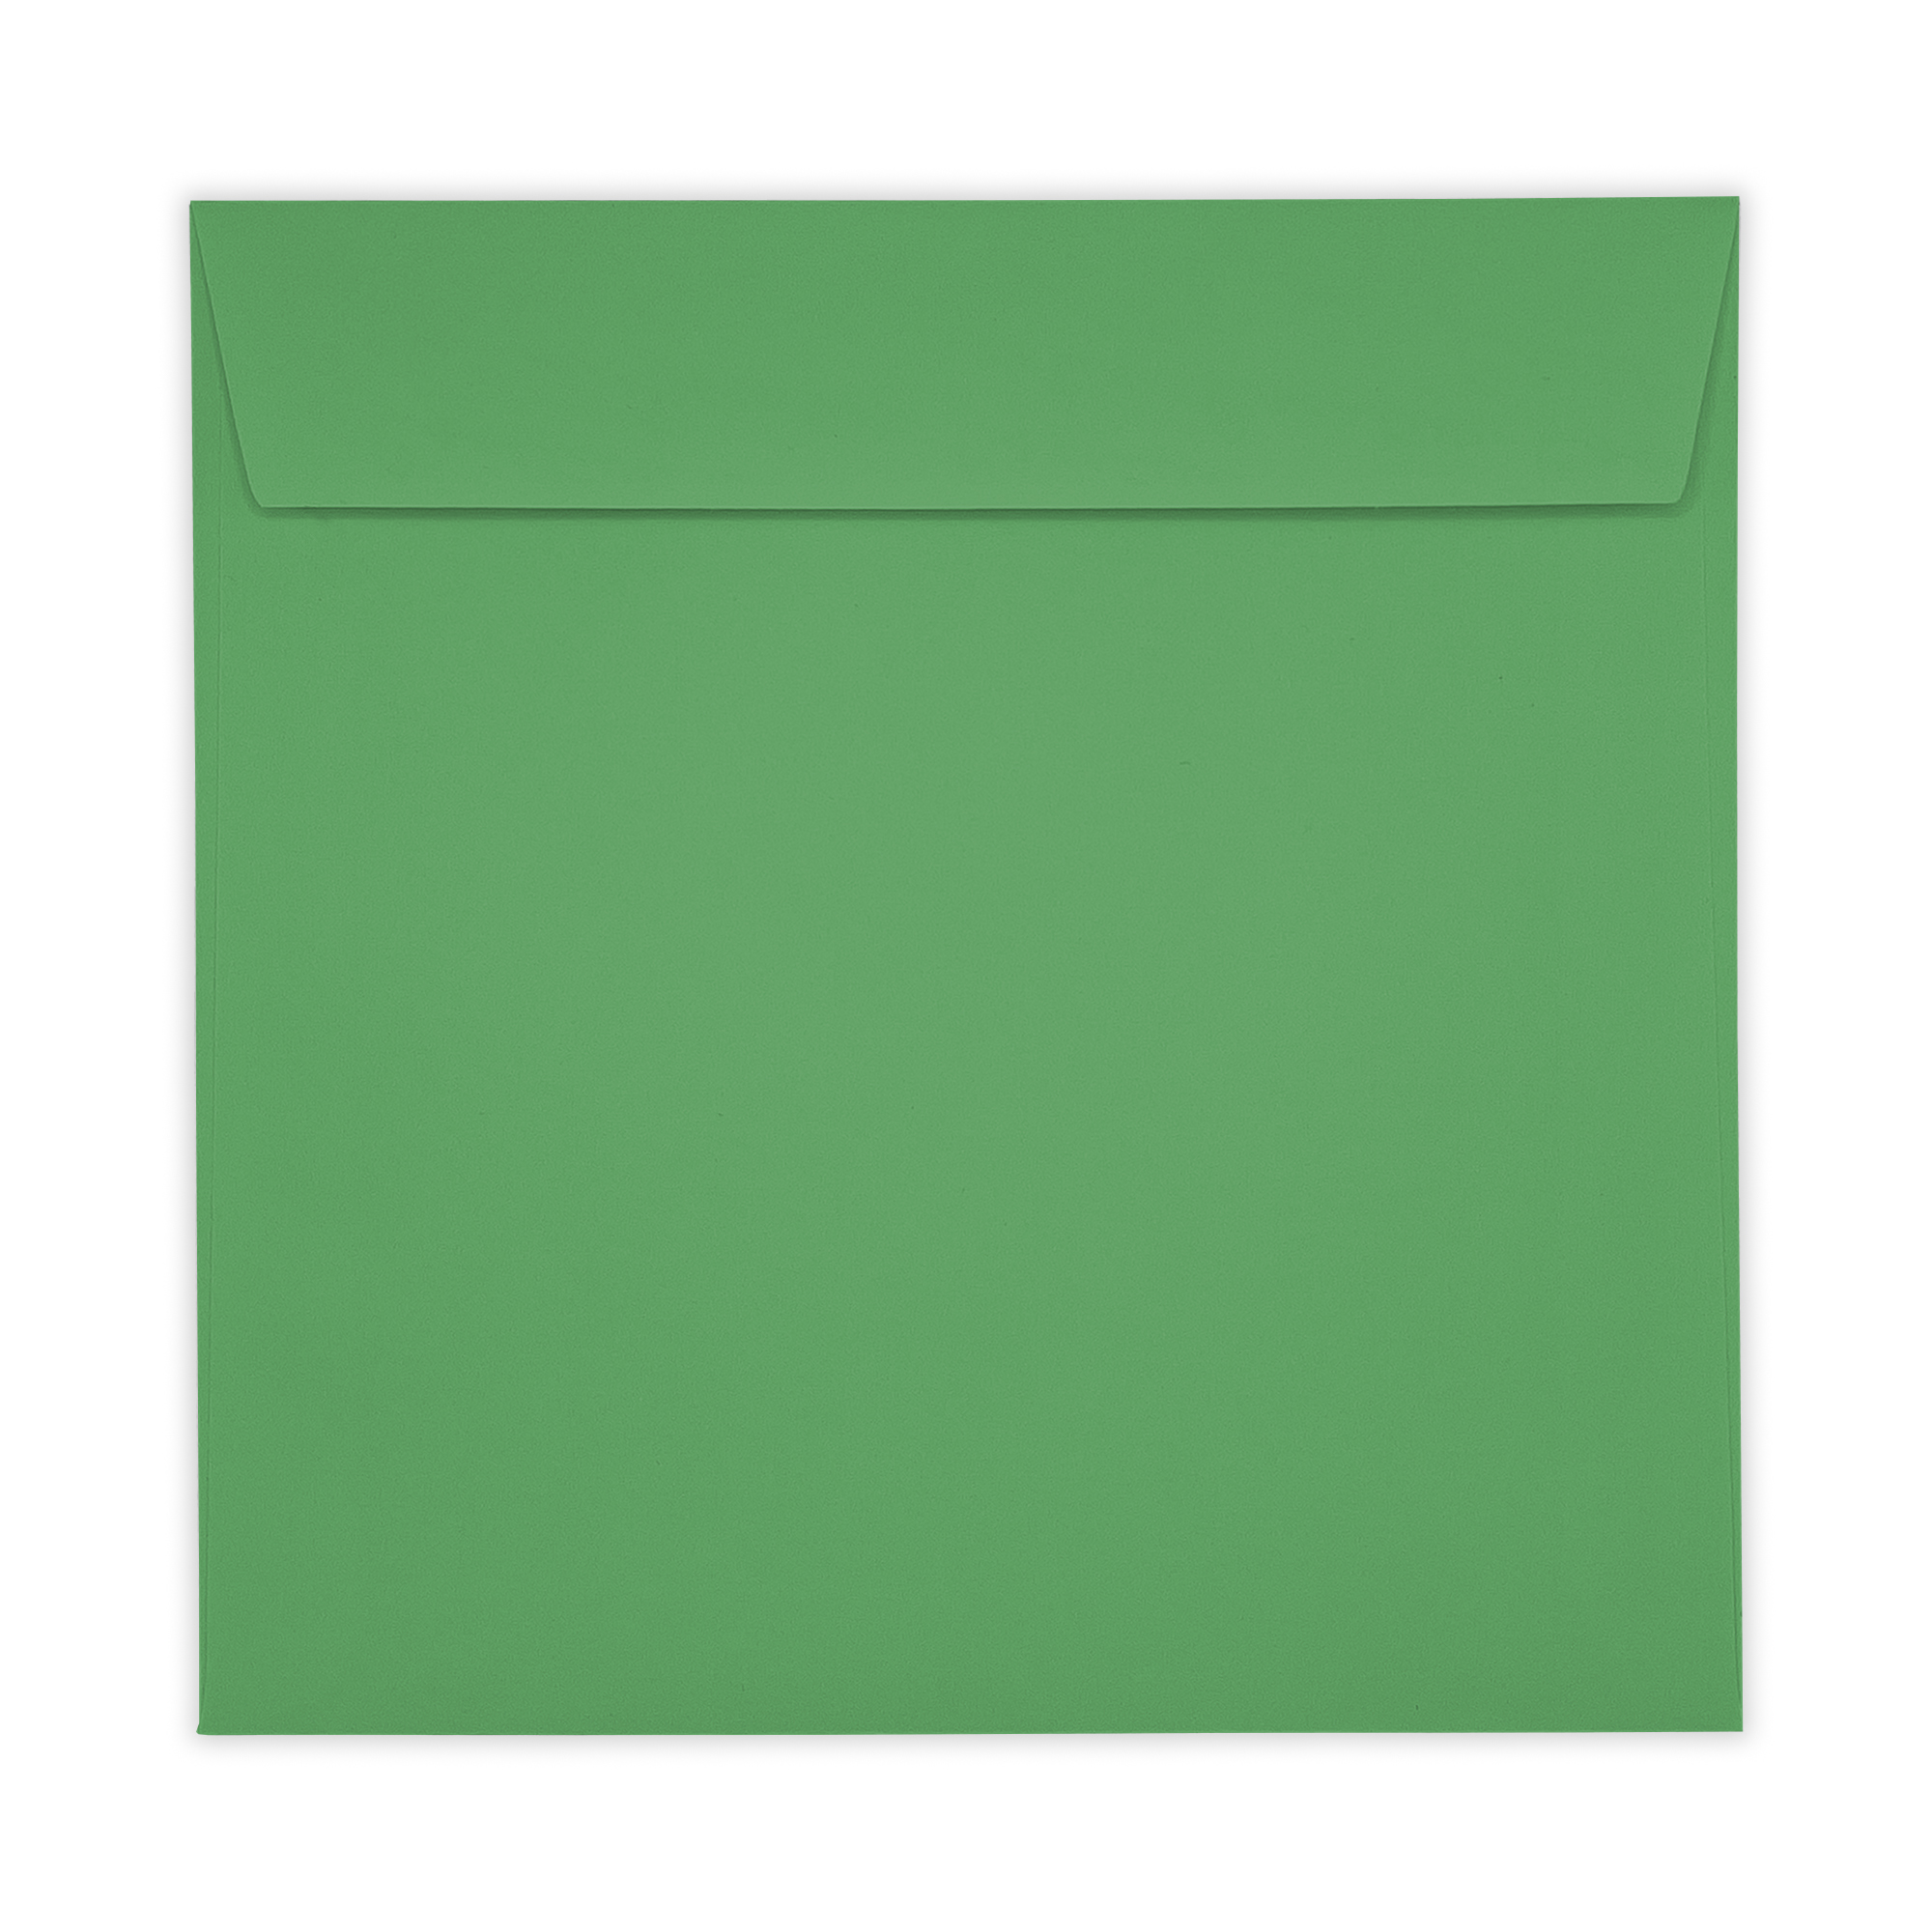 Avacado Green Square Peel and Seal Wallet Envelopes 120gsm Flap Closed